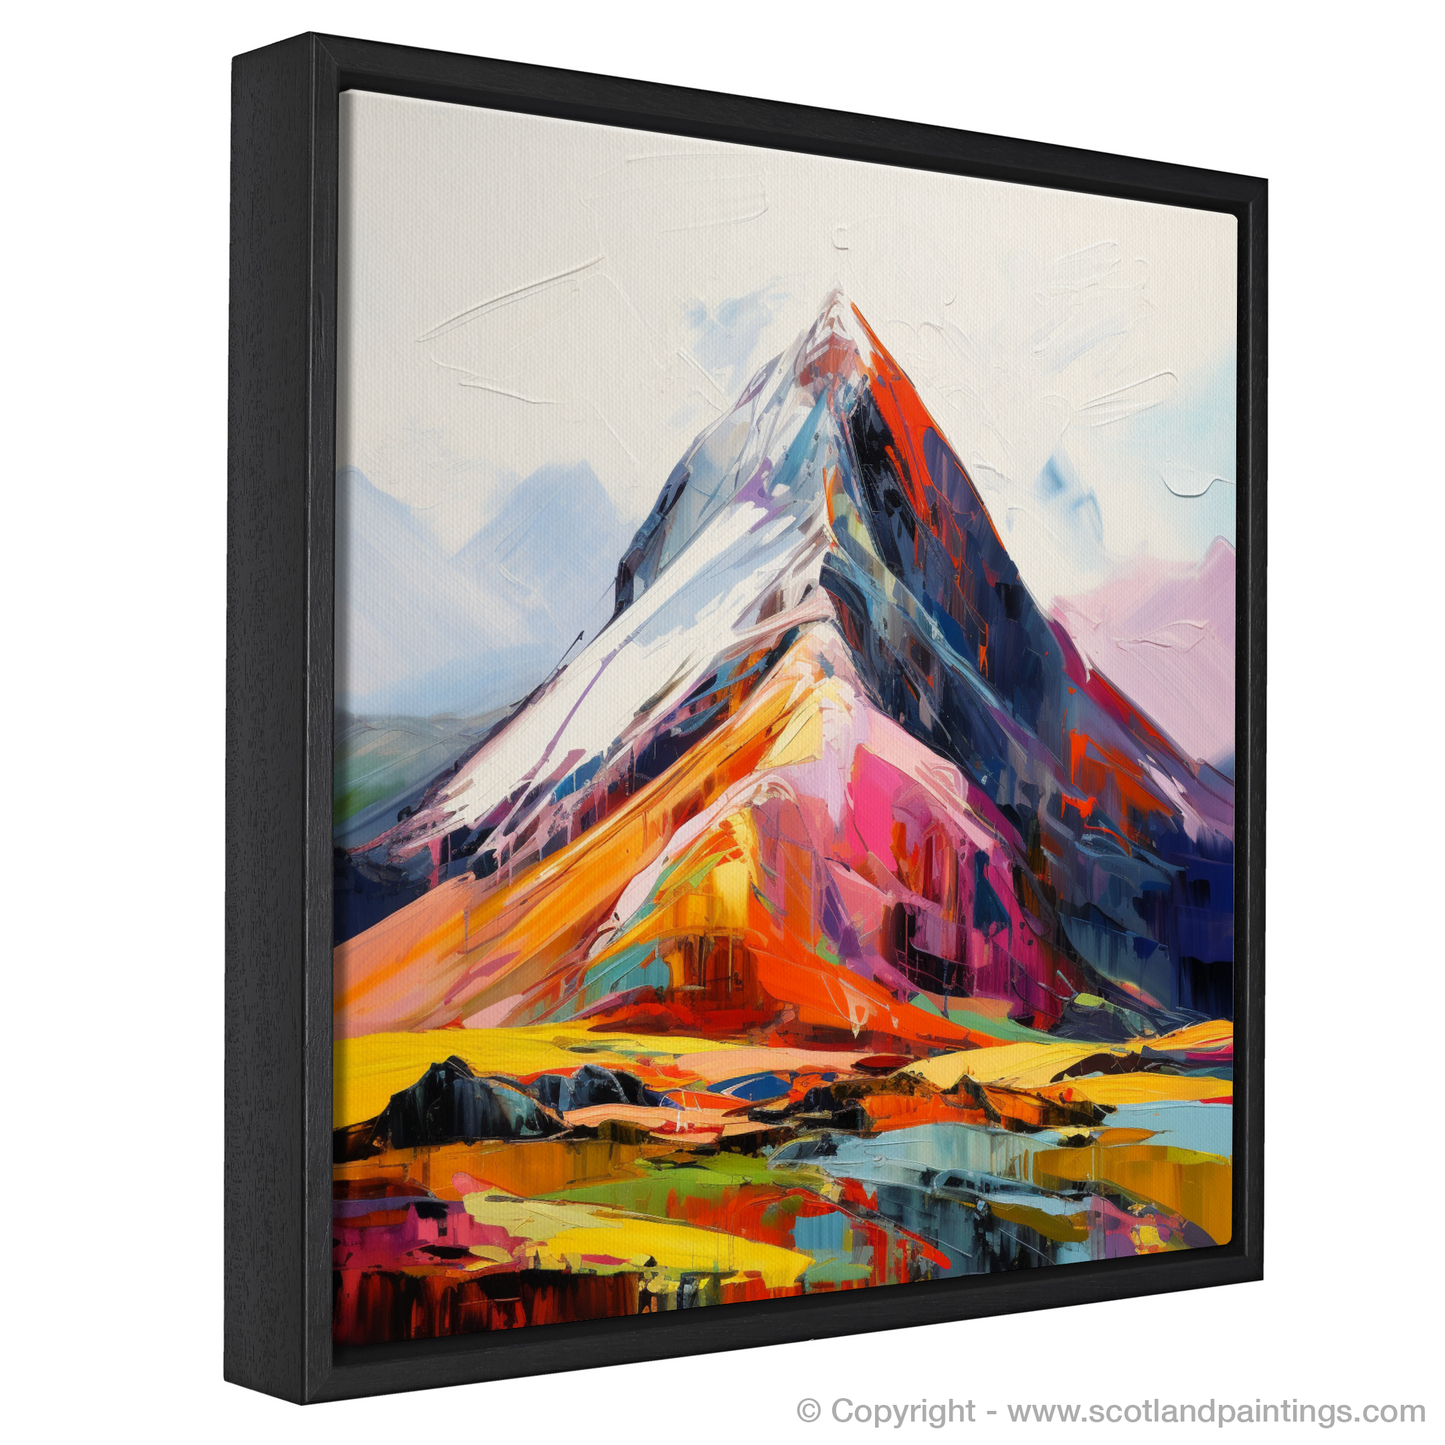 Painting and Art Print of Stob Binnein entitled "Fiery Embrace of Stob Binnein: An Expressionist Ode to the Scottish Highlands".